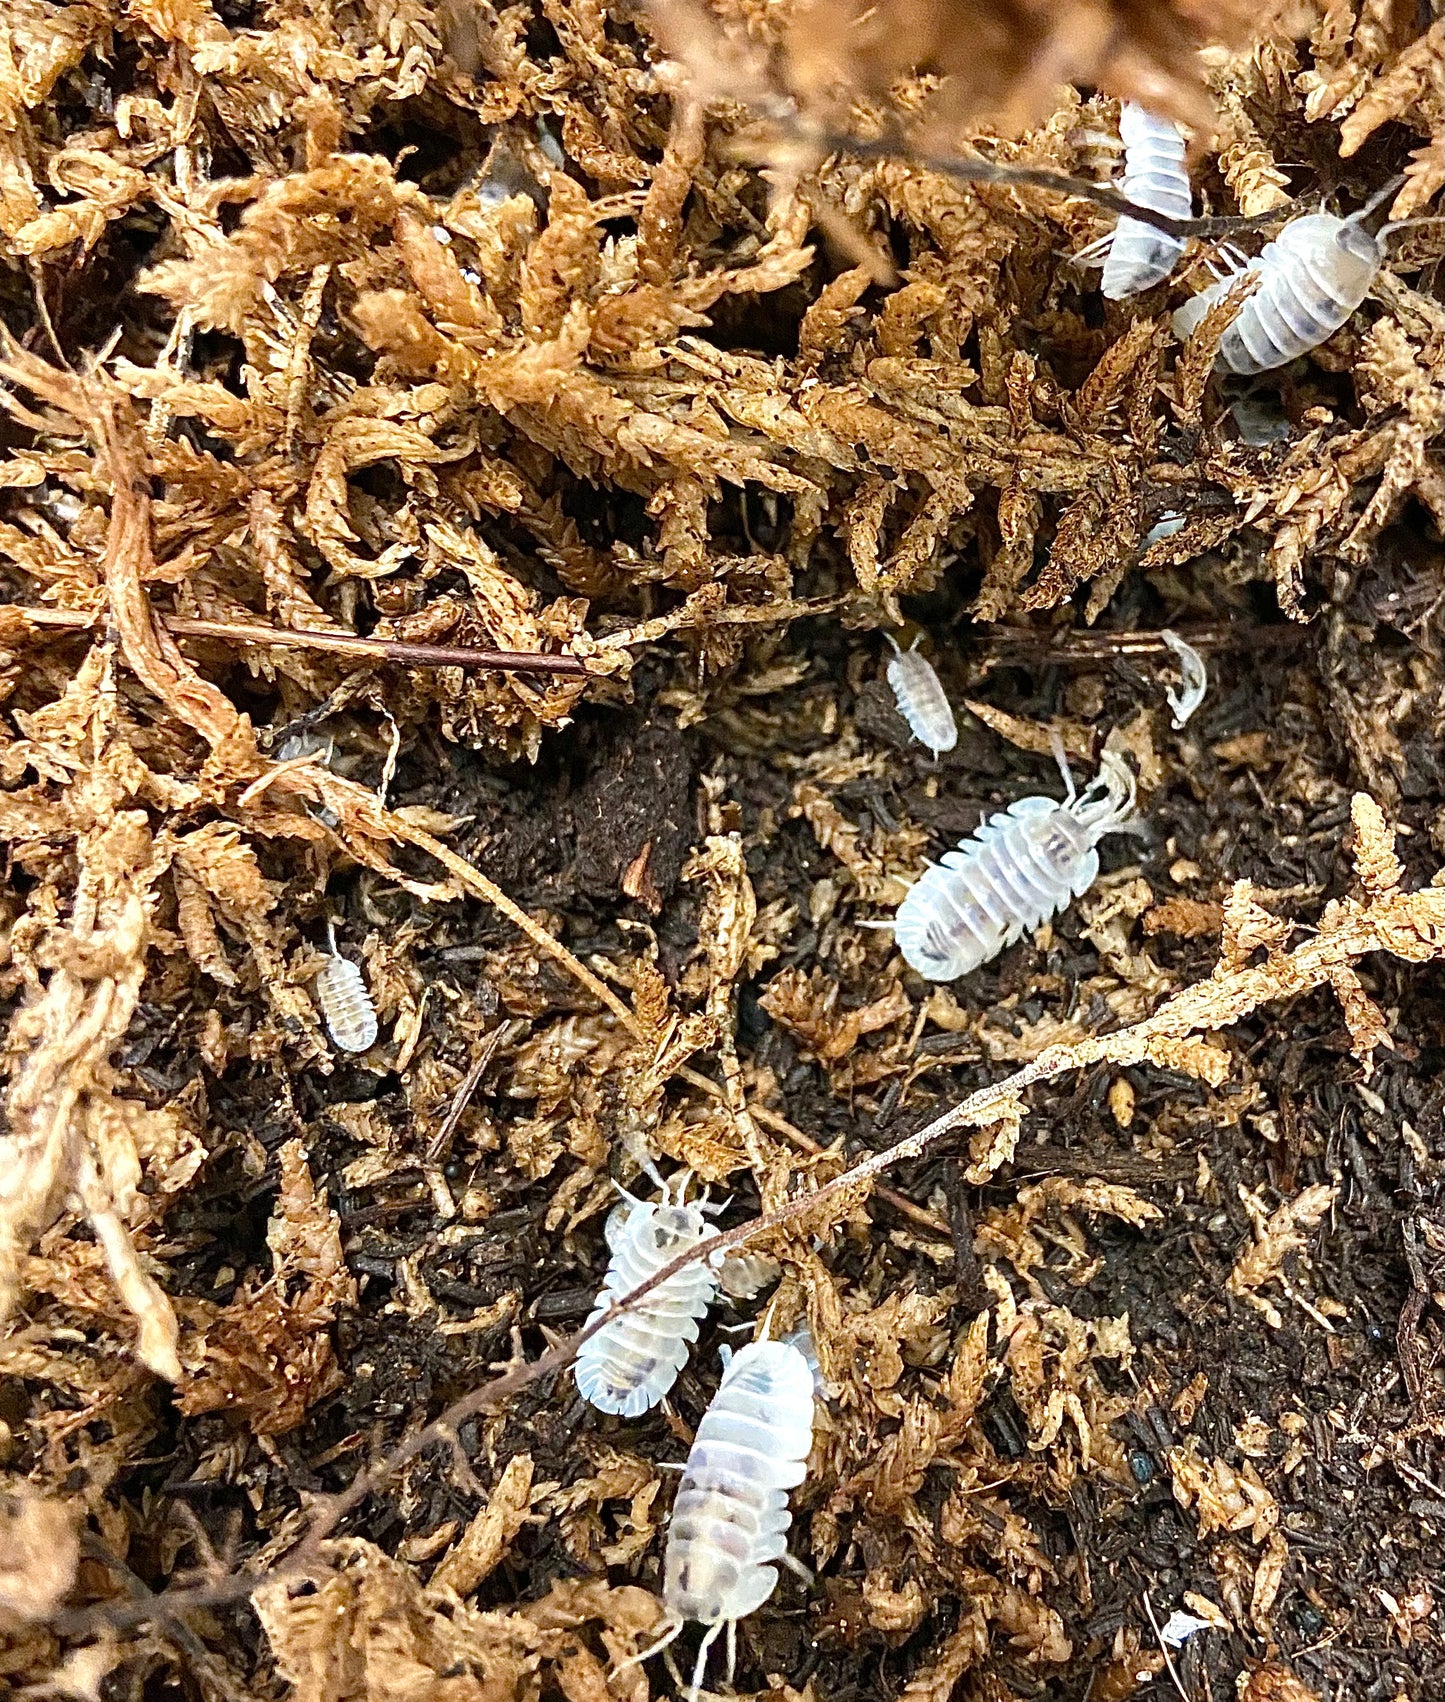 Isopods For Sale